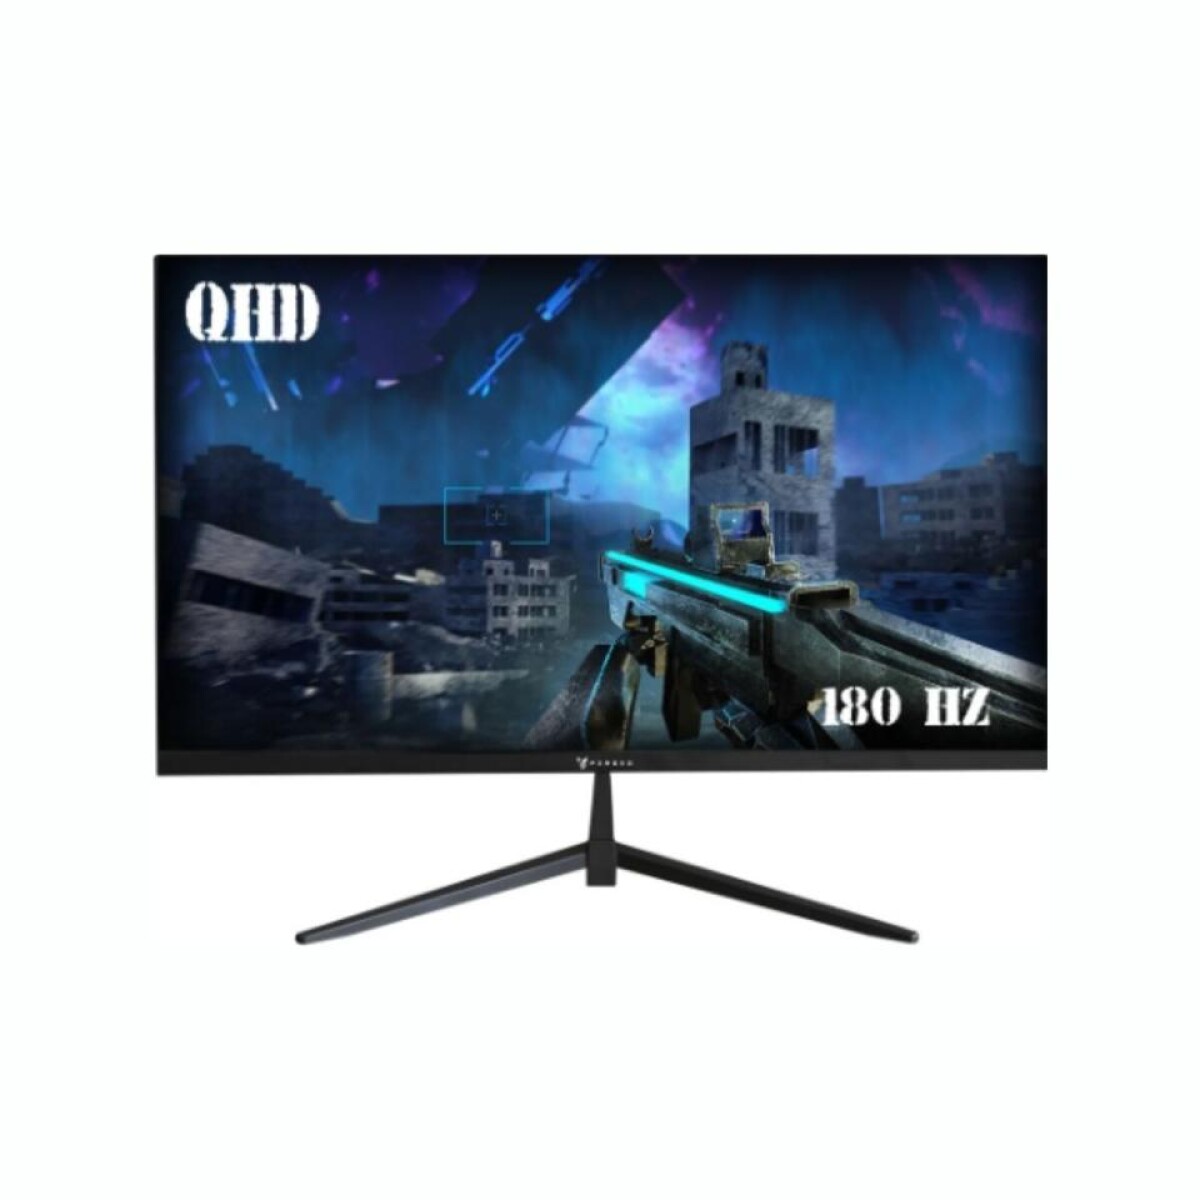 Monitor PERSEO Hermes 27' 2K LED 180Hz 